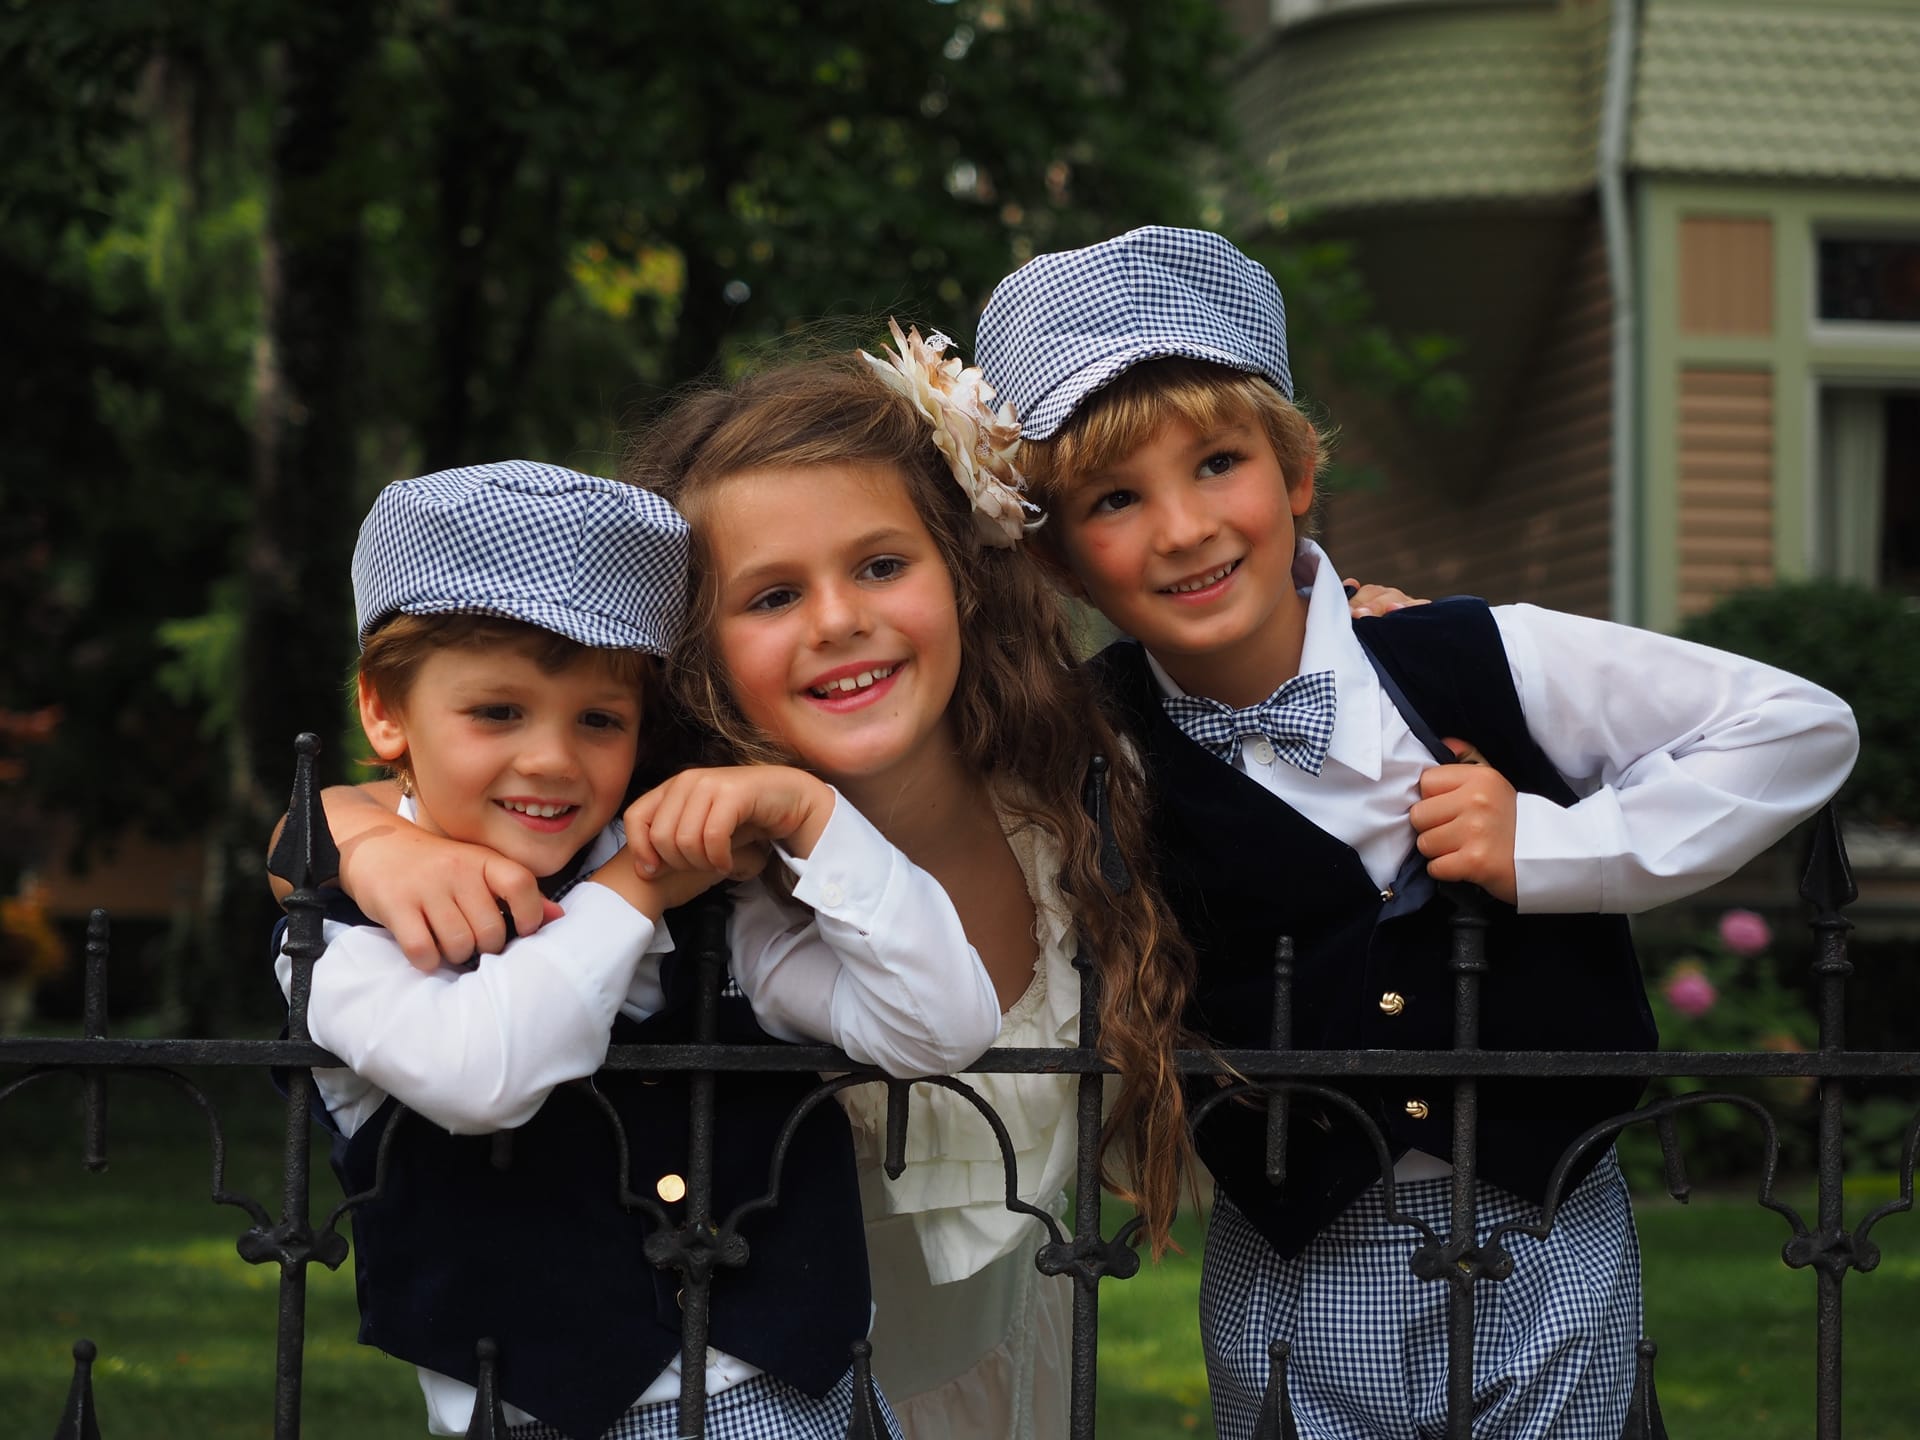 Shot cute little girl two boys identical costumes standing fence